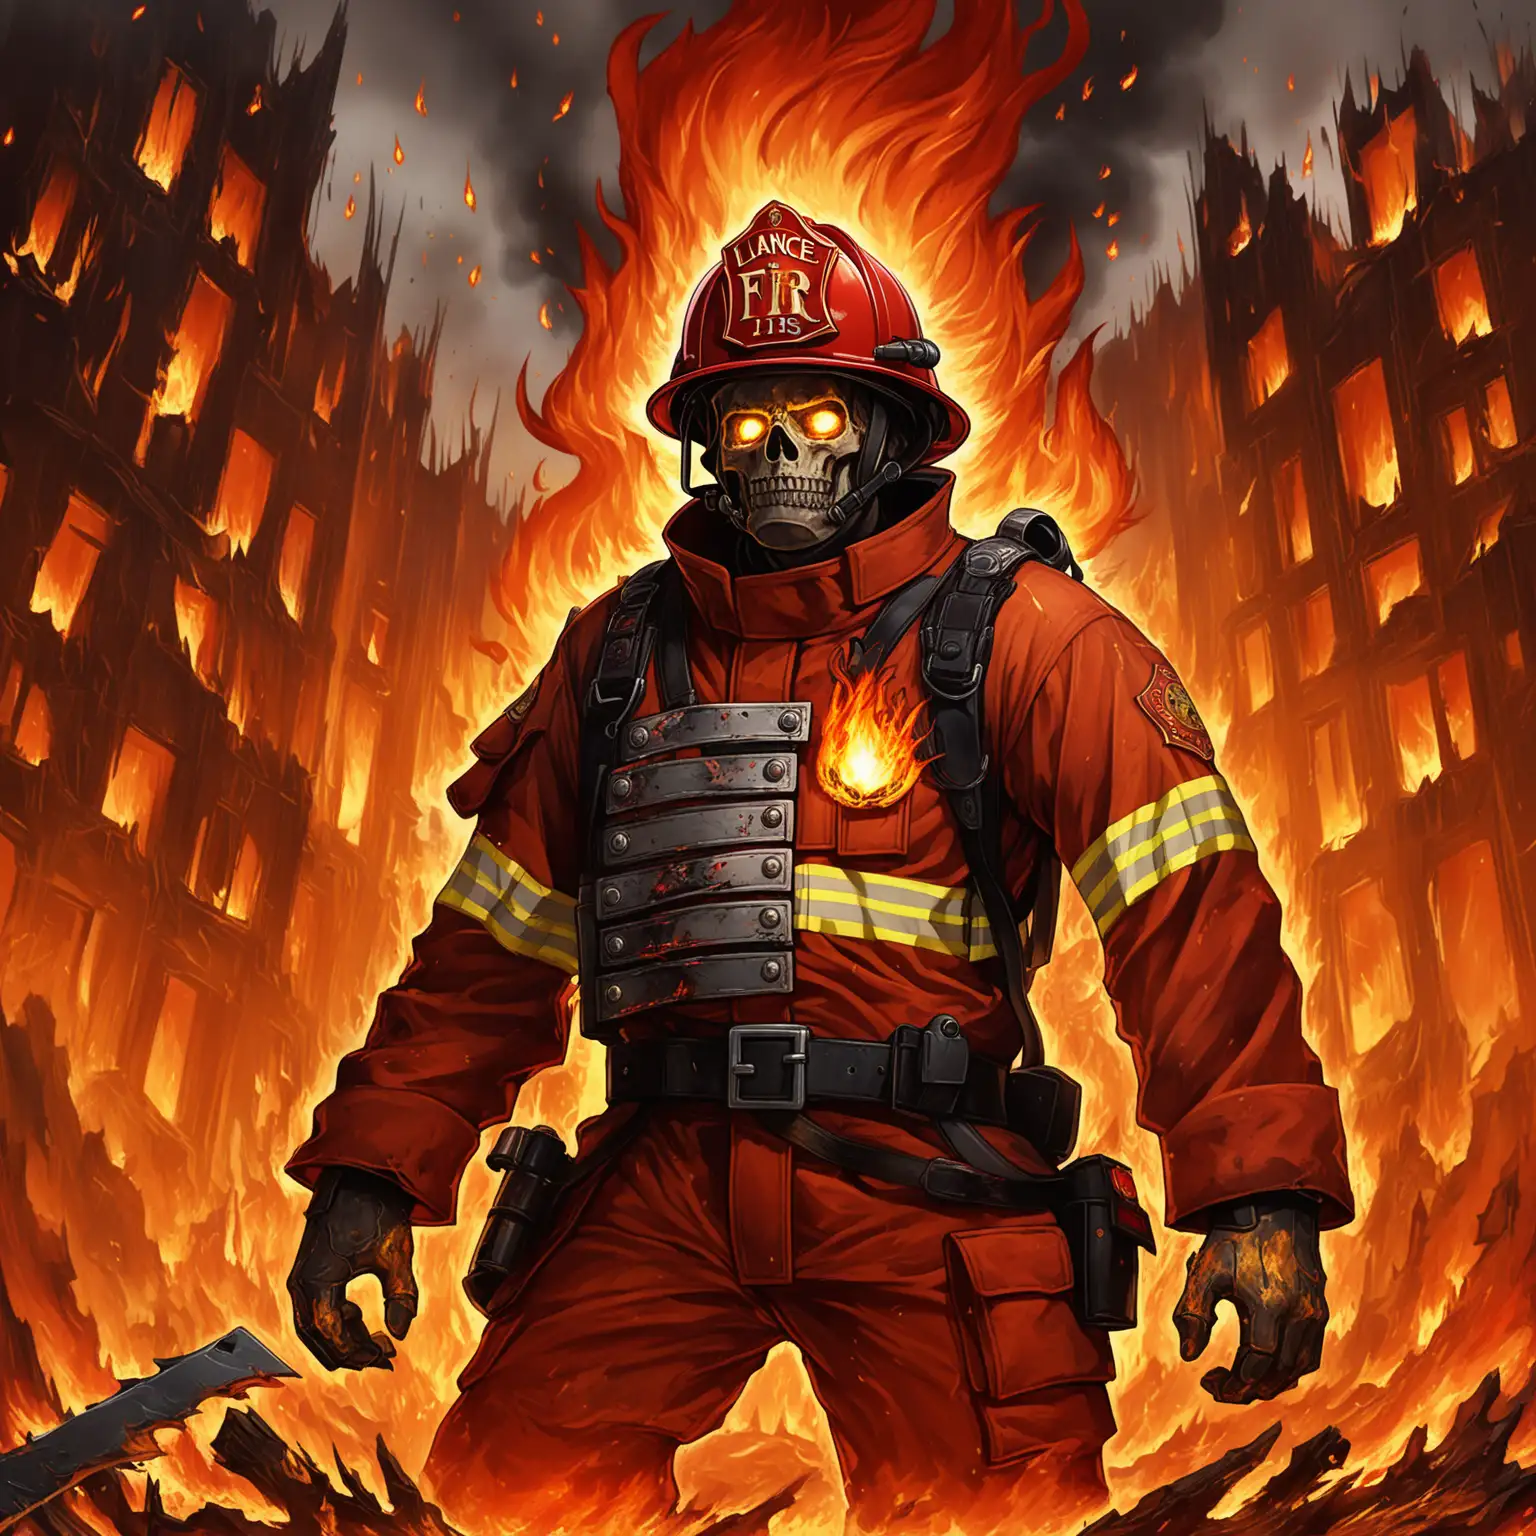 Background:

The background of the card is a gradient of intense oranges, reds, and yellows, mimicking the colors of roaring flames. Flickering animations of fire could add to the dynamic feel.
Silhouettes of burning buildings and charred remnants are faintly visible in the backdrop, hinting at his destructive tendencies and tragic past.
Portrait:

Lance’s face is prominently featured in the center of the card. His expression is one of grim determination, with a slight hint of madness in his eyes.
His skin is rugged and weathered, showing signs of burns and soot, indicative of his time spent amid fires.
He has short, messy hair with singed tips, adding to the image of someone constantly surrounded by flames.
His eyes are a striking amber, glowing subtly to imply an inner fire and intensity.
Attire:

Lance is wearing a scorched firefighter’s uniform, with parts of it burned away to reveal protective gear underneath. The uniform is dark with reflective stripes, and his firefighter helmet, dented and charred, is either on his head or hanging from his neck.
He has a makeshift bandolier across his chest, adorned with fire-related tools and weapons, such as small incendiary devices and a hatchet.
Accents:

The edges of the face card are decorated with animated embers and smoke trails, giving the impression that the card itself is smoldering.
A faint overlay of ash occasionally drifts across the card, enhancing the theme of destruction and fire.
Nameplate:

At the bottom of the card, his name "Lance 'Scorch' Fuego" is displayed in bold, fiery text with a cracked, molten rock effect. The text flickers slightly, as if it is being licked by flames.